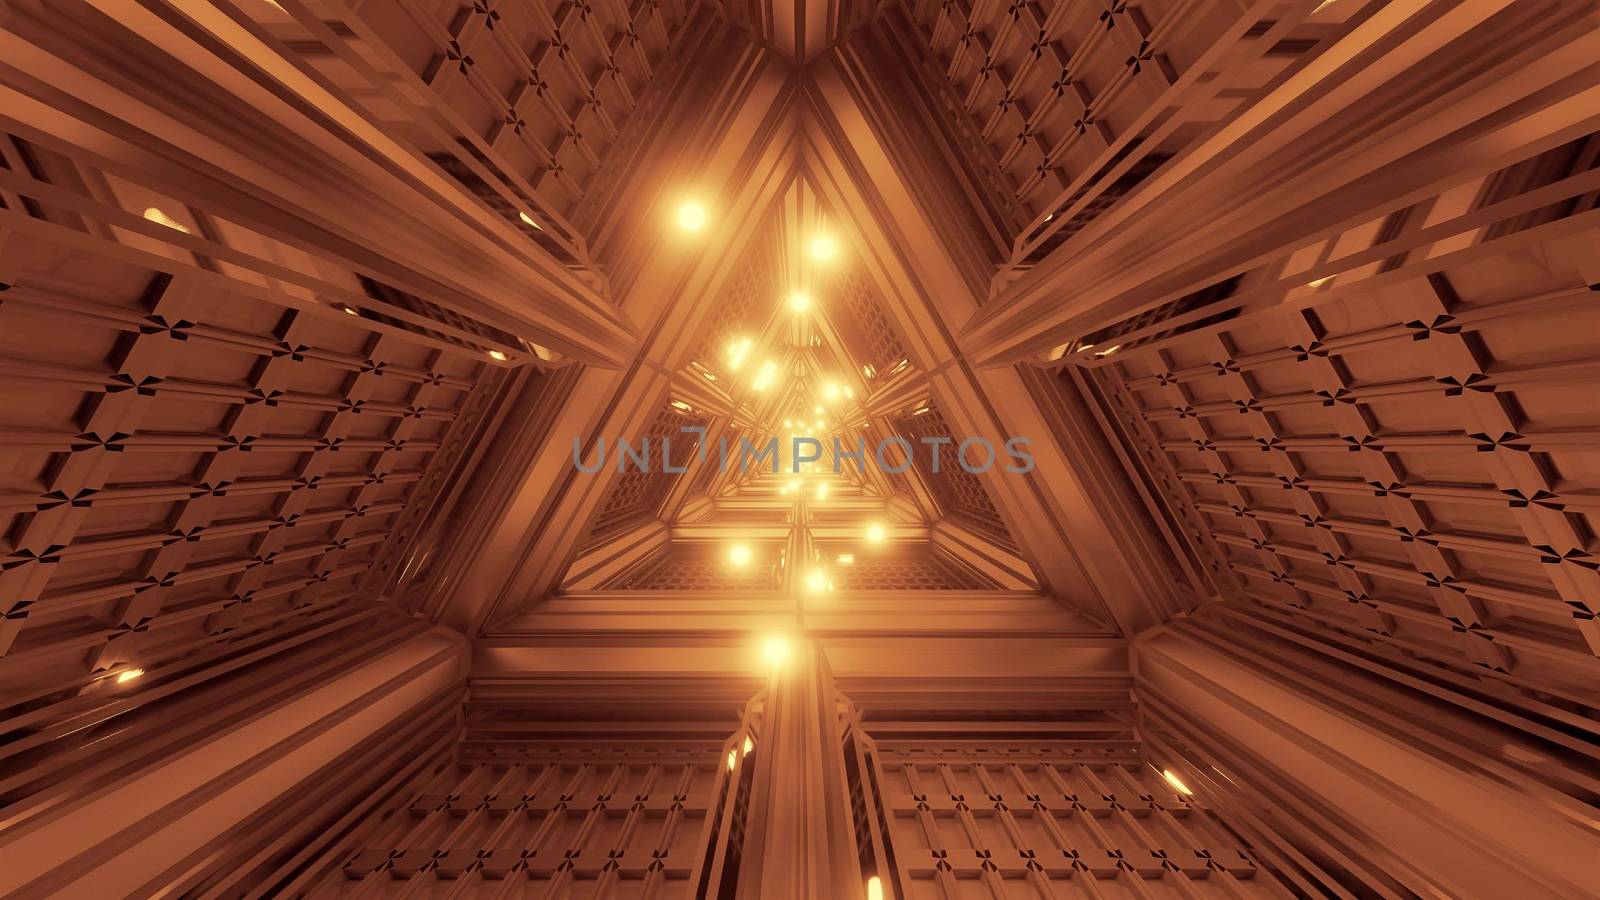 glowing spheres particles fly through triangle space tunnel corridor 3d illustration backgrounds wallpaper graphics artworks by tunnelmotions